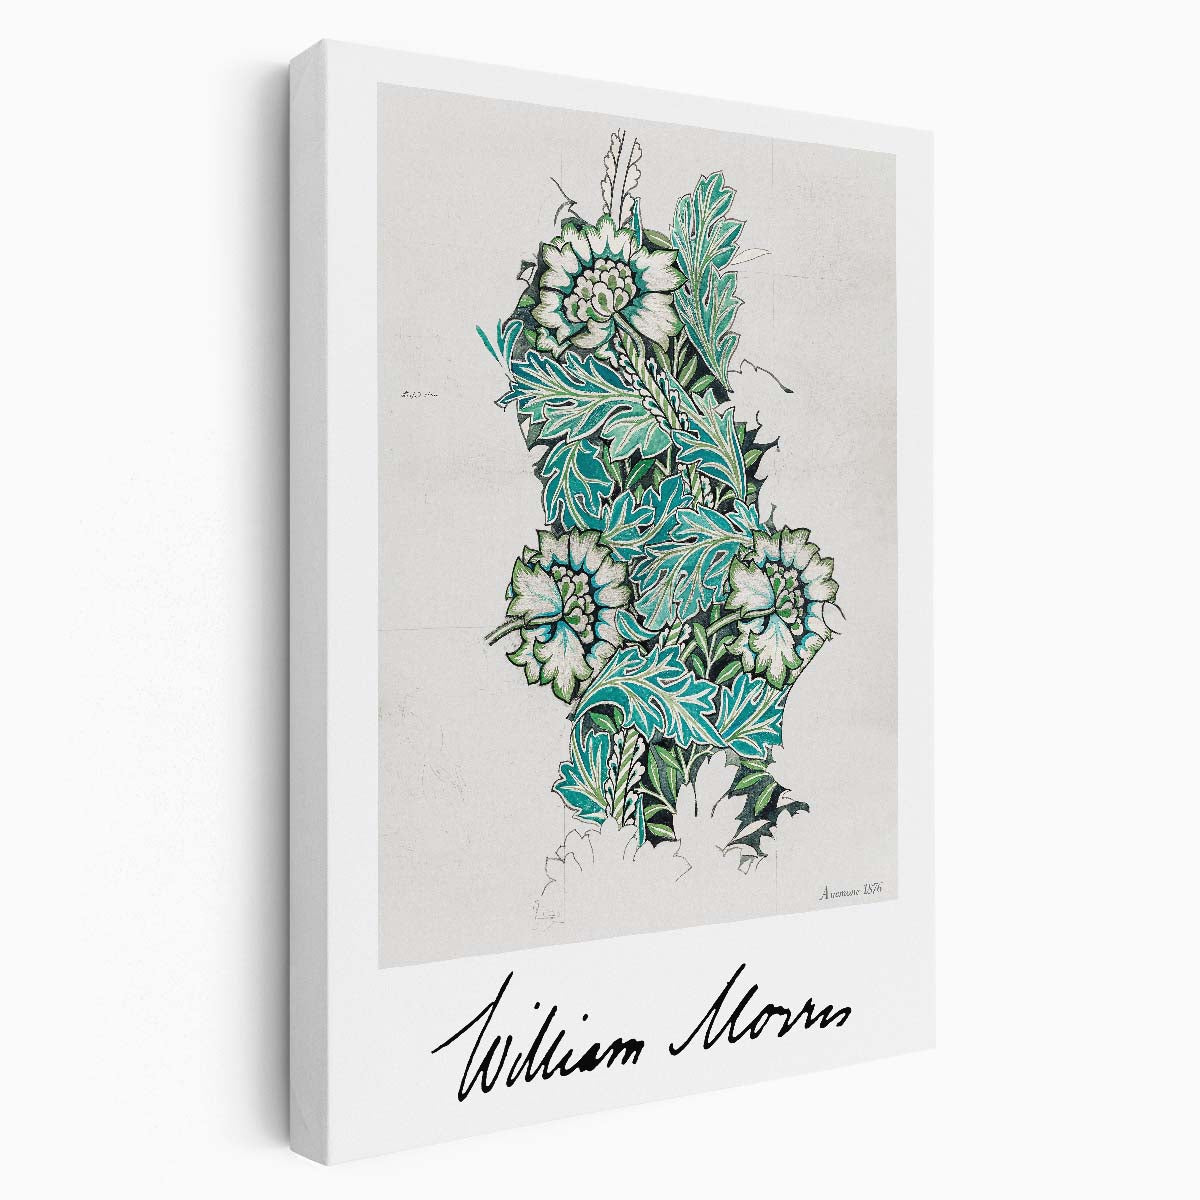 William Morris Vintage Anemone Illustration, Inspirational Green Typography Poster by Luxuriance Designs, made in USA